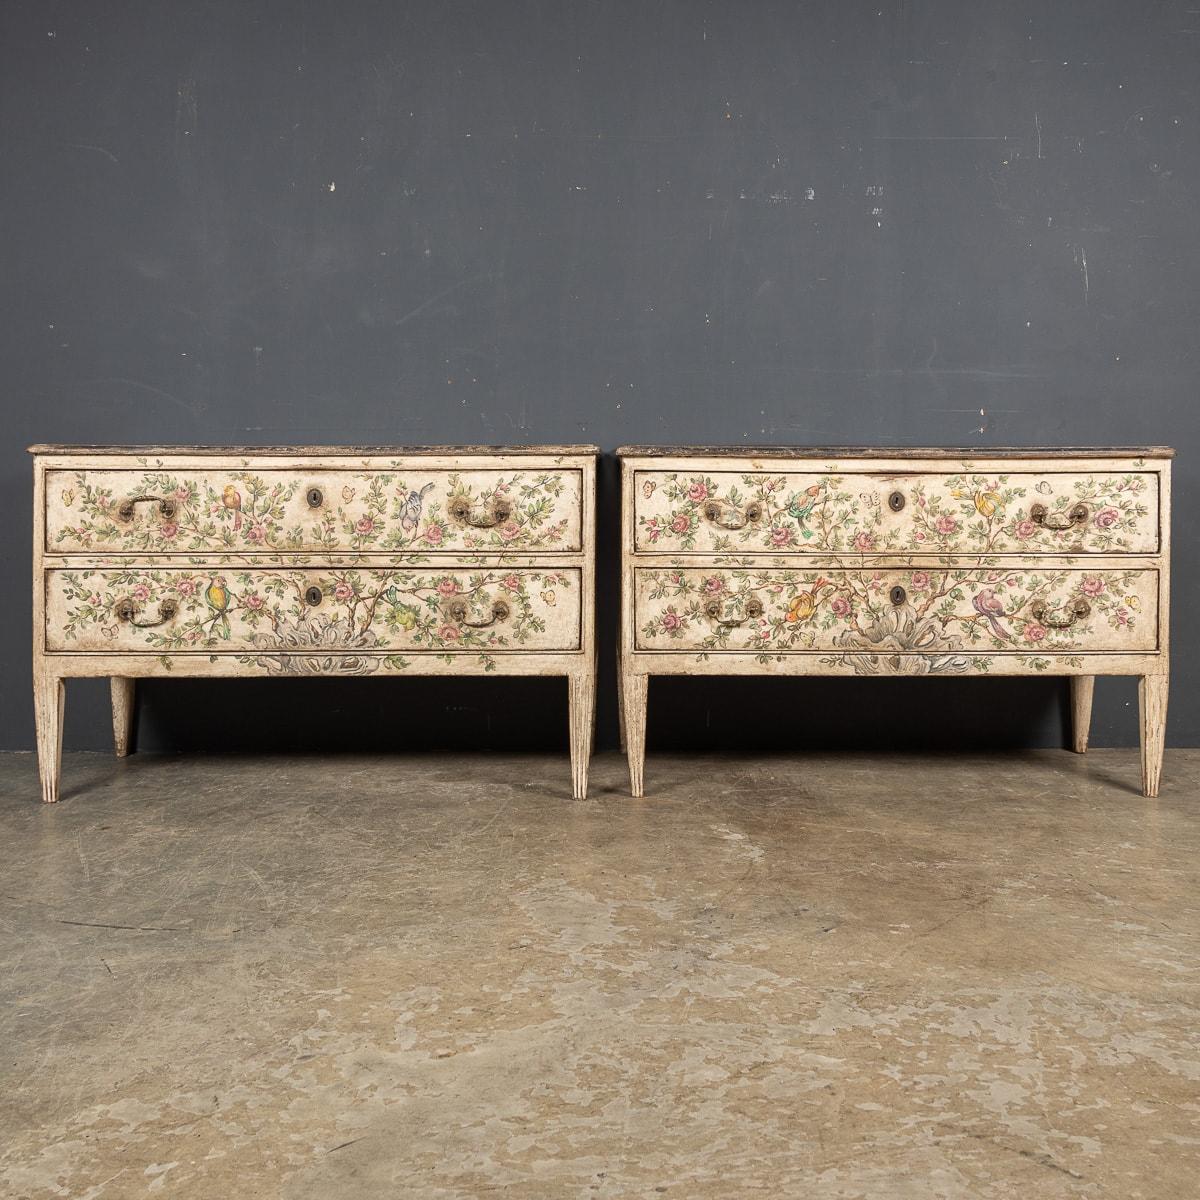 A pair of 20th Century Italian commodes crafted from wood showcase a captivating naturalistic theme. Adorned with paintings of birds, butterflies, and trees, these commodes boast a timeless charm. The spacious interior is facilitated by four large